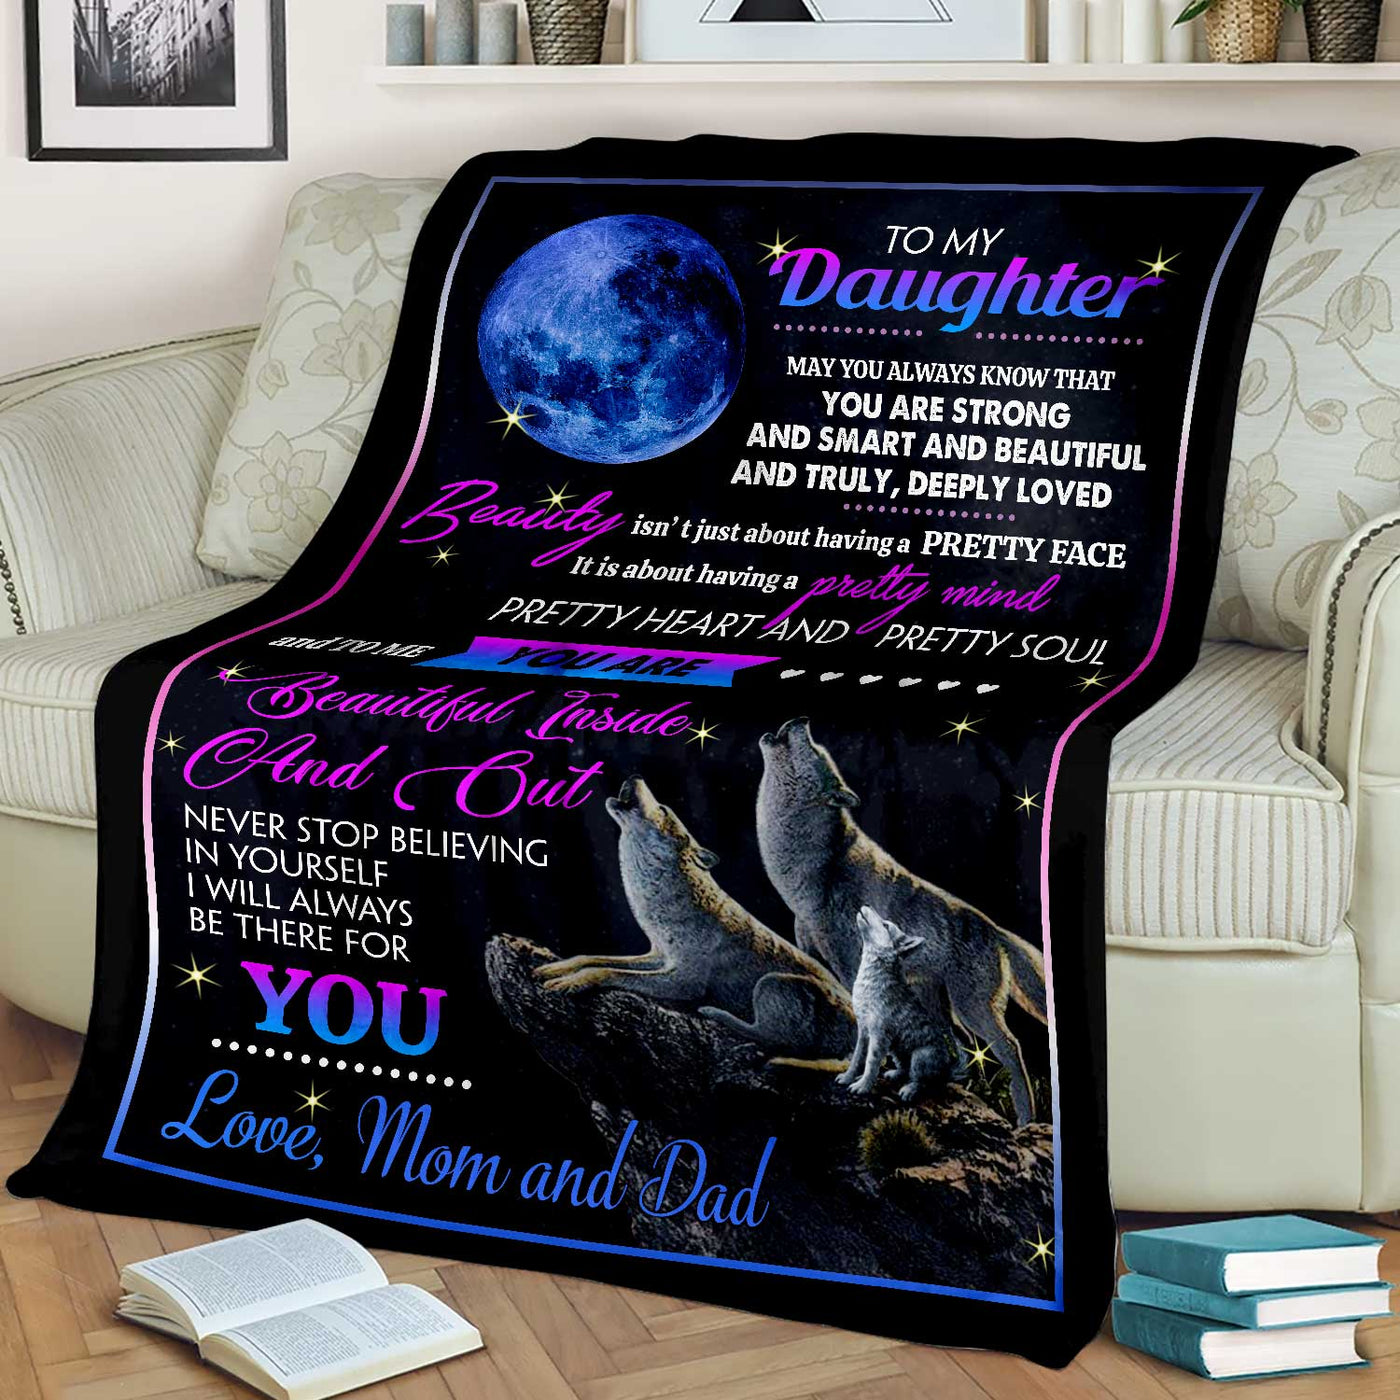 Personalized Blanket for Daughter – “You are beautiful inside" - Customized Gift for Birthday, Christmas,...